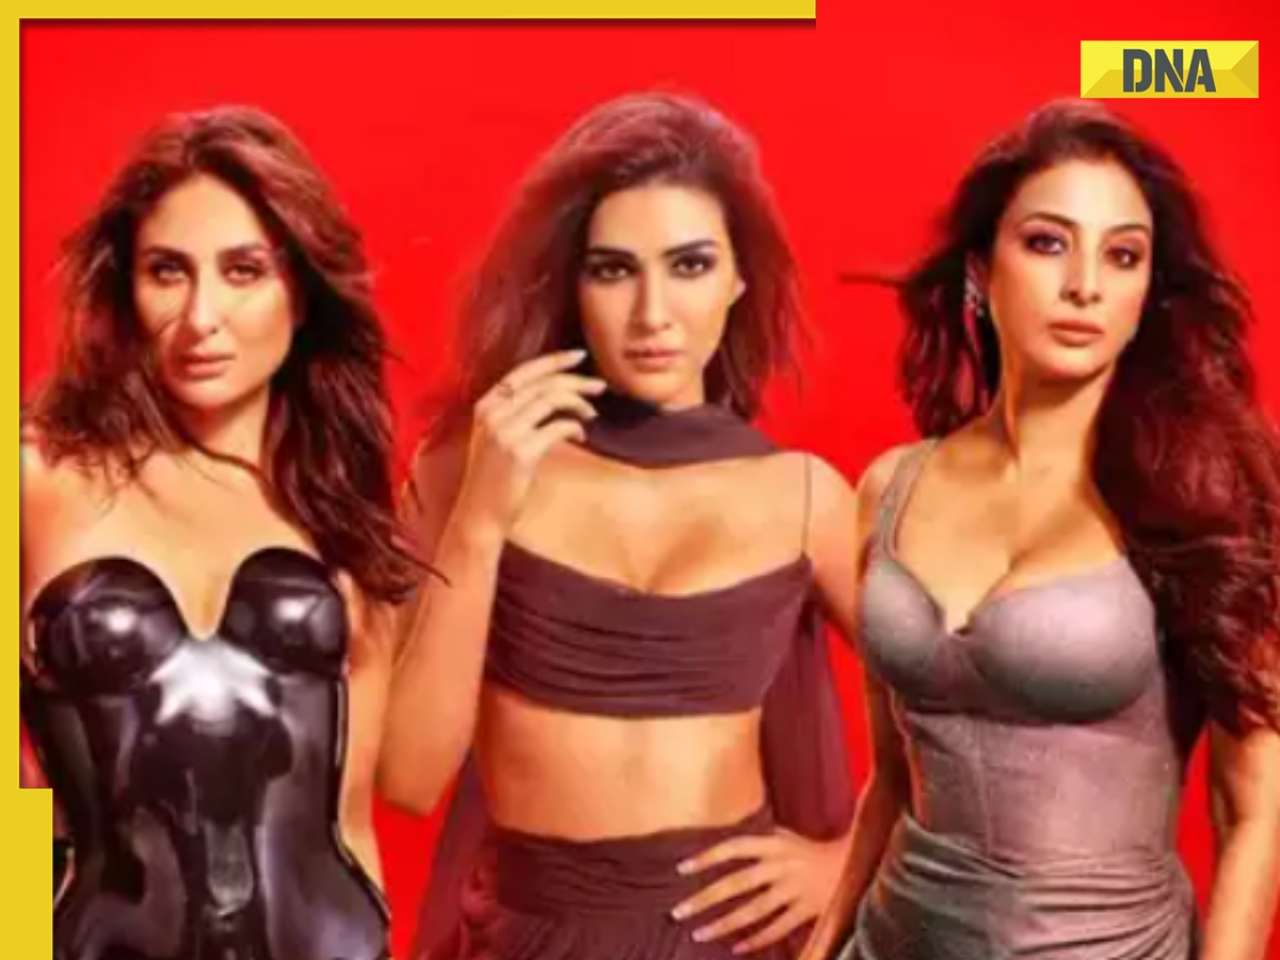 Crew box office collection day 5: Kareena, Tabu, Kriti's film stays steady on first Tuesday, earns Rs 4 crore